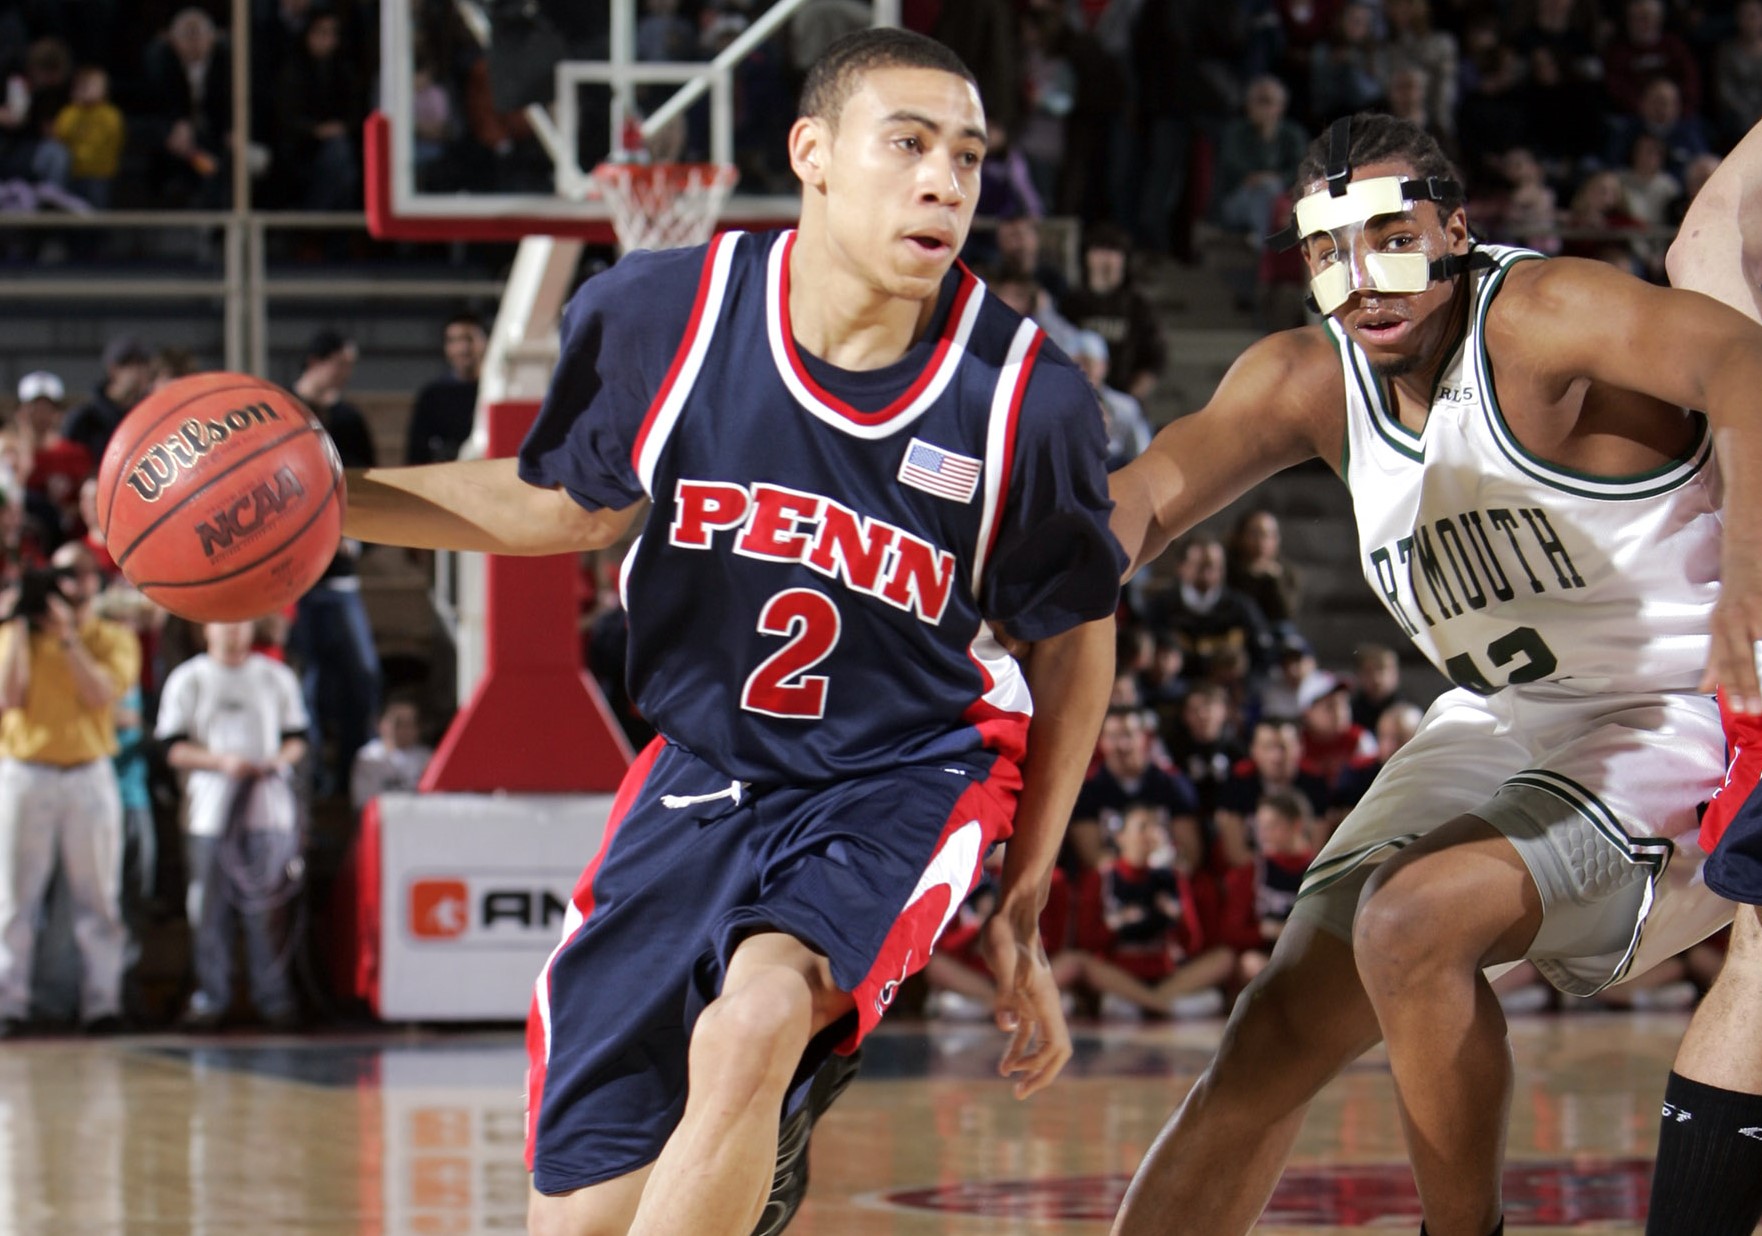 Ibrahim Jaaber dribbles to the basket during a game against Dartmouth.